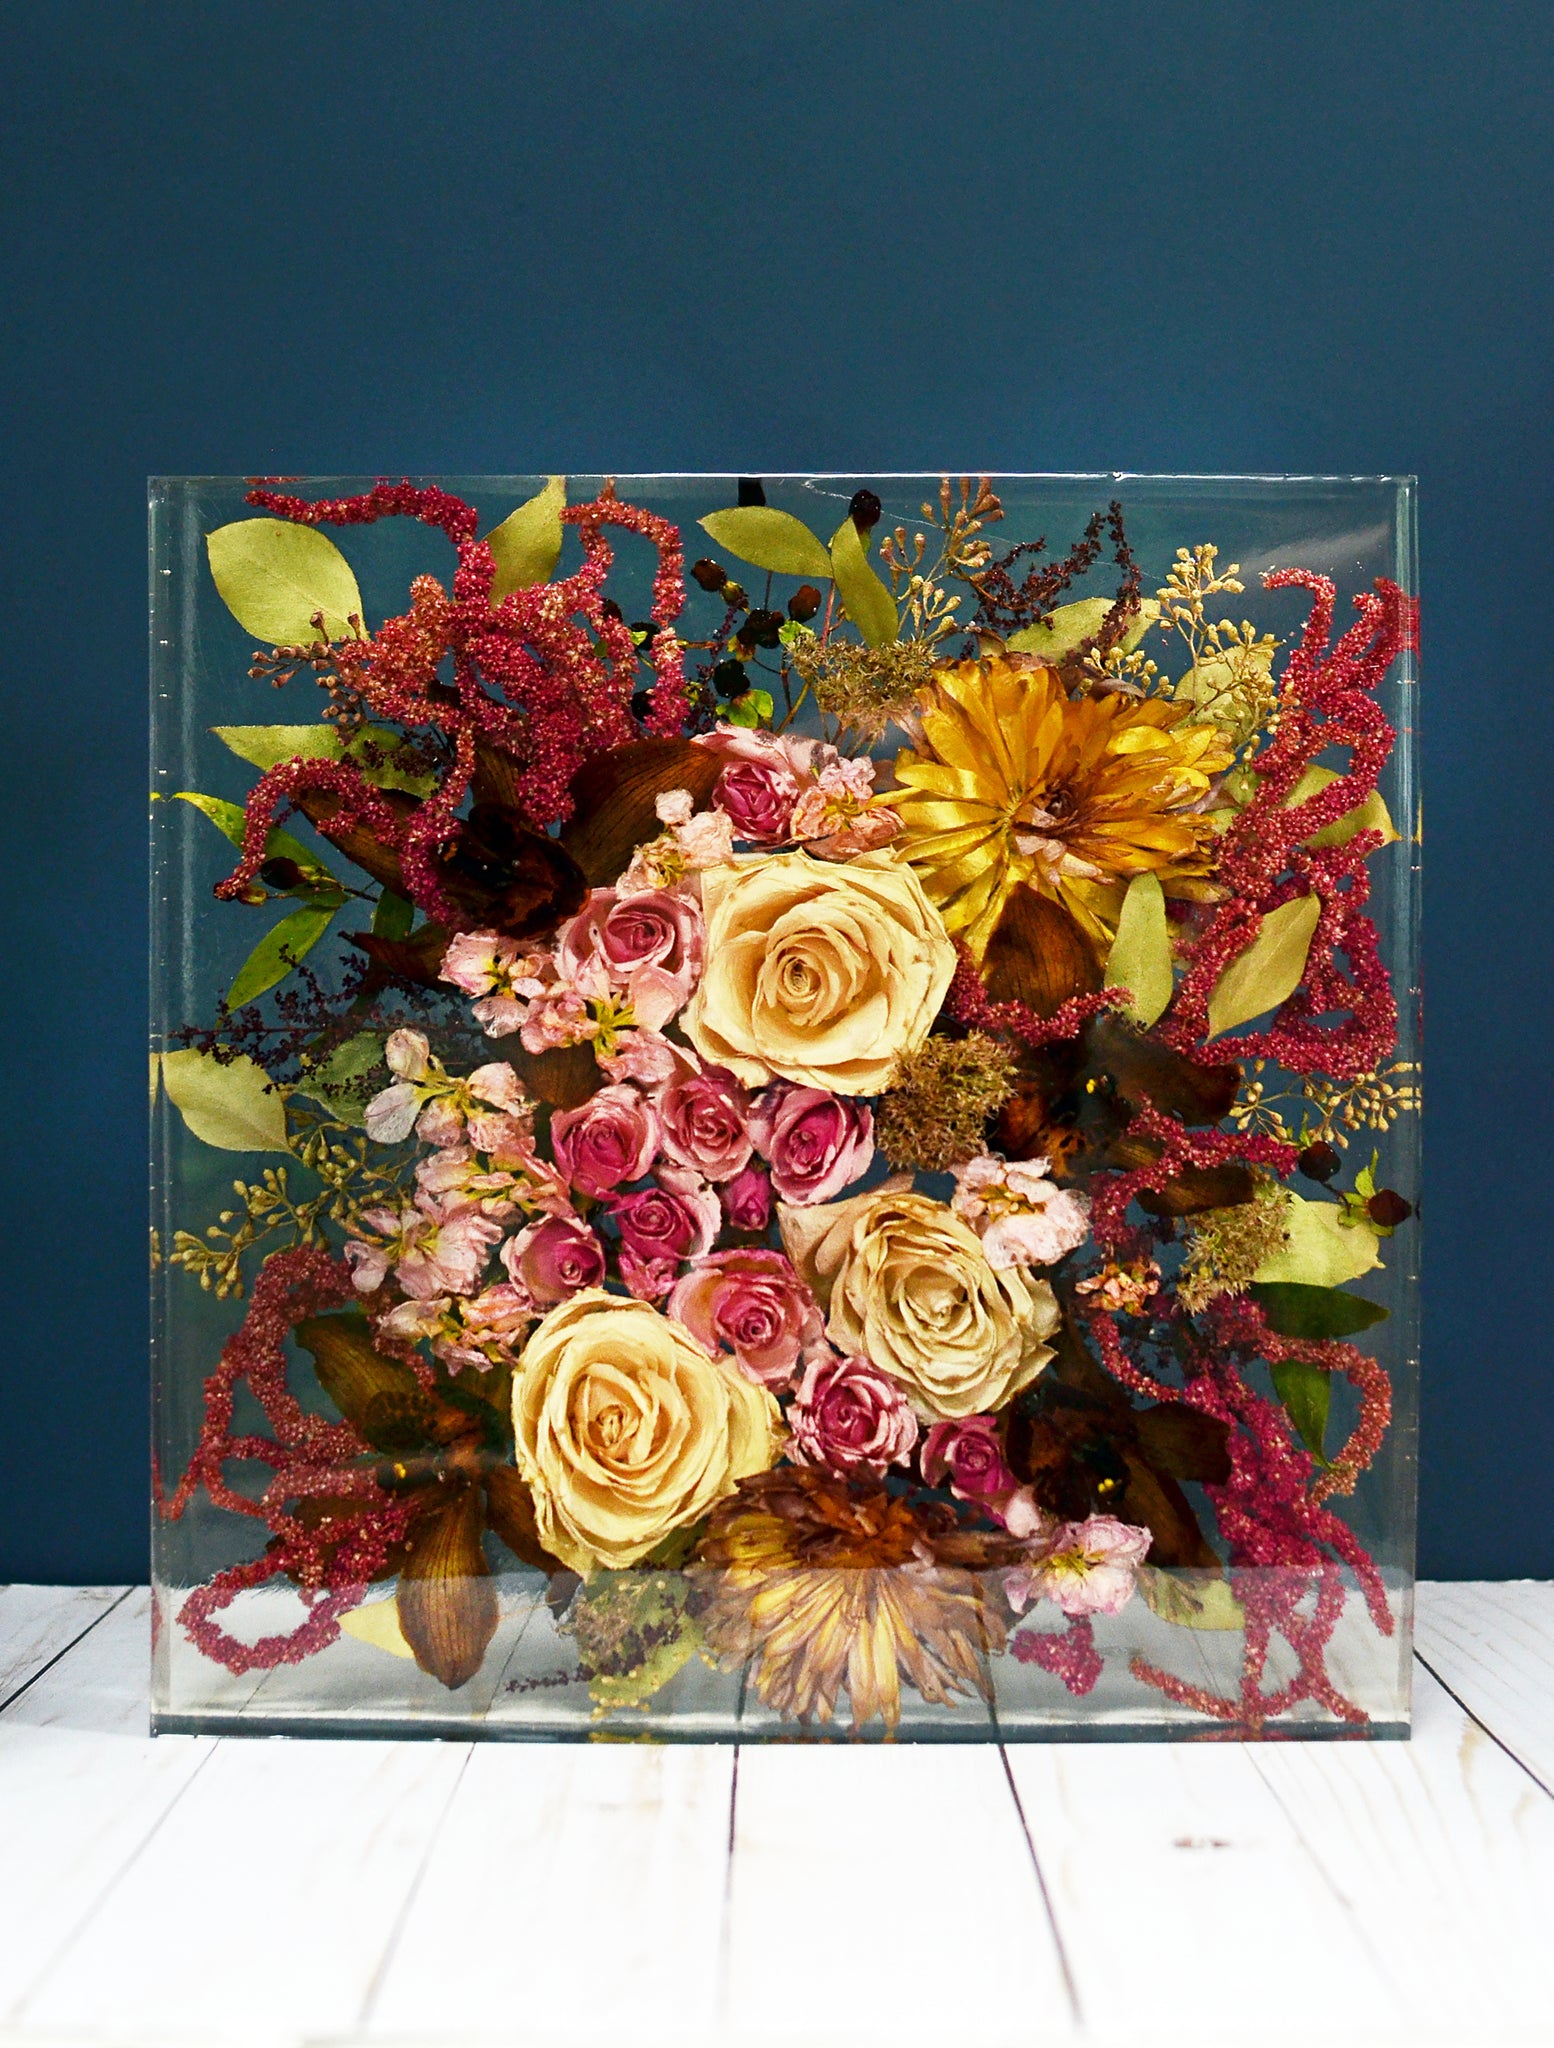 Previously Dried Flowers 9 x 12 Large Rectangle 3D Resin Wedding